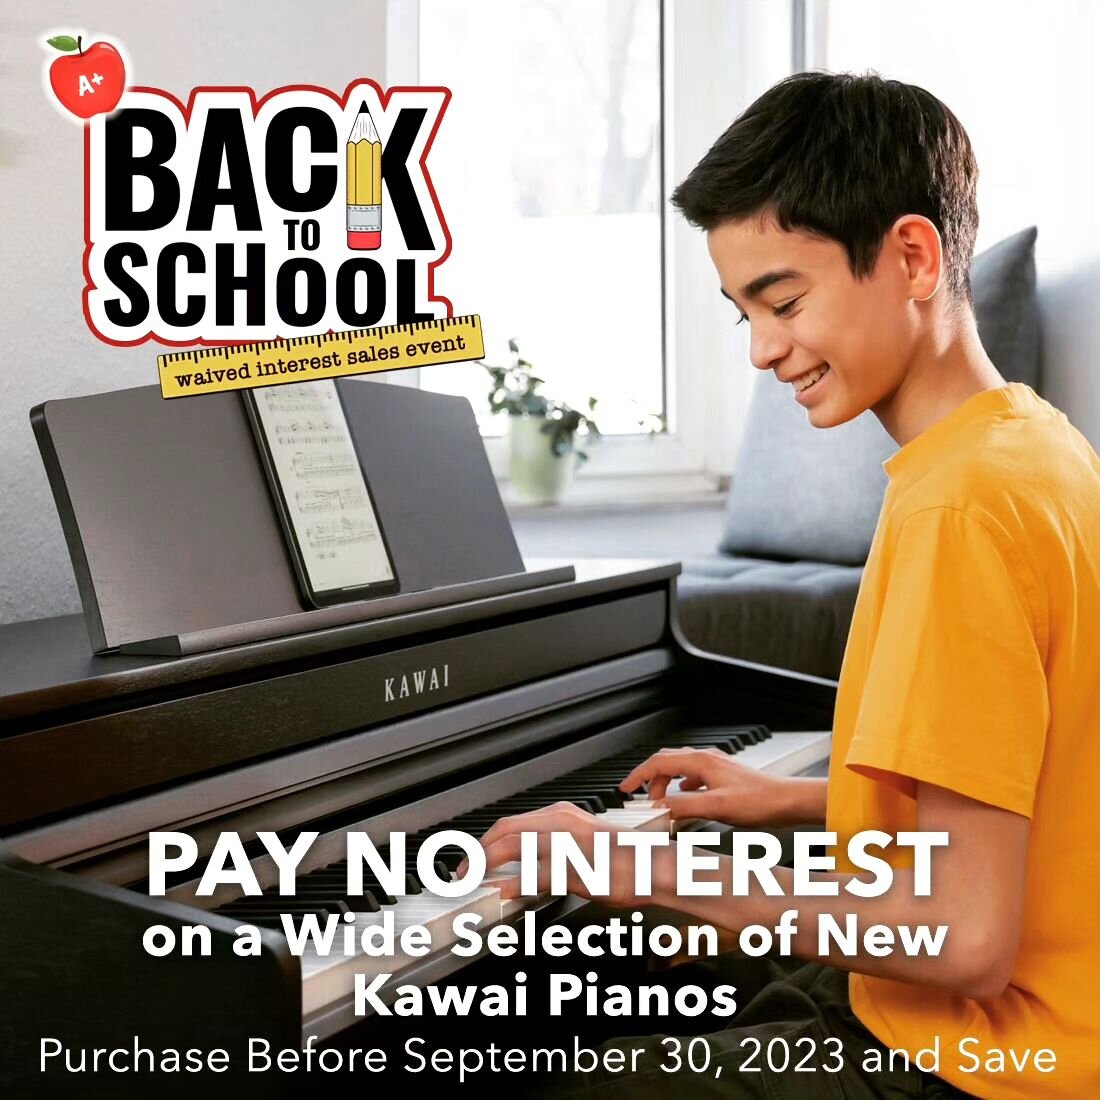 Kawais Best Deal Is Back!

Pay no interest for 24 months. 

Piano Masters Inc 
Authorized Kawai Dealer 
Call: 818.913.9913 

Piano's in stock and ready to be delivered. 

Don't miss this amazing opportunity. Secure your dream piano today!